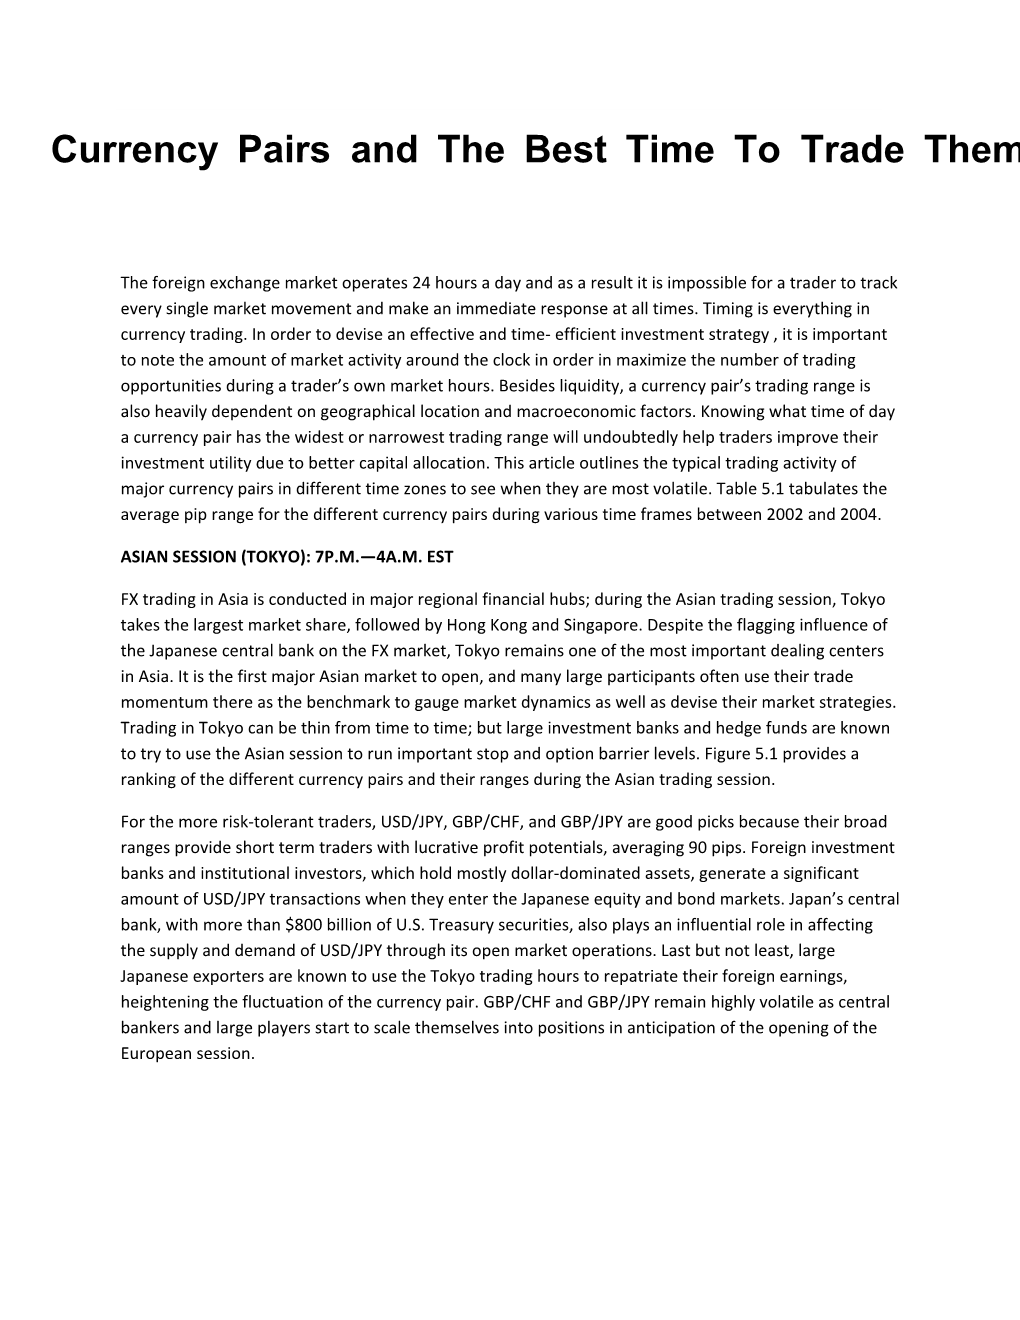 Currency Pairs and the Best Time to Trade Them